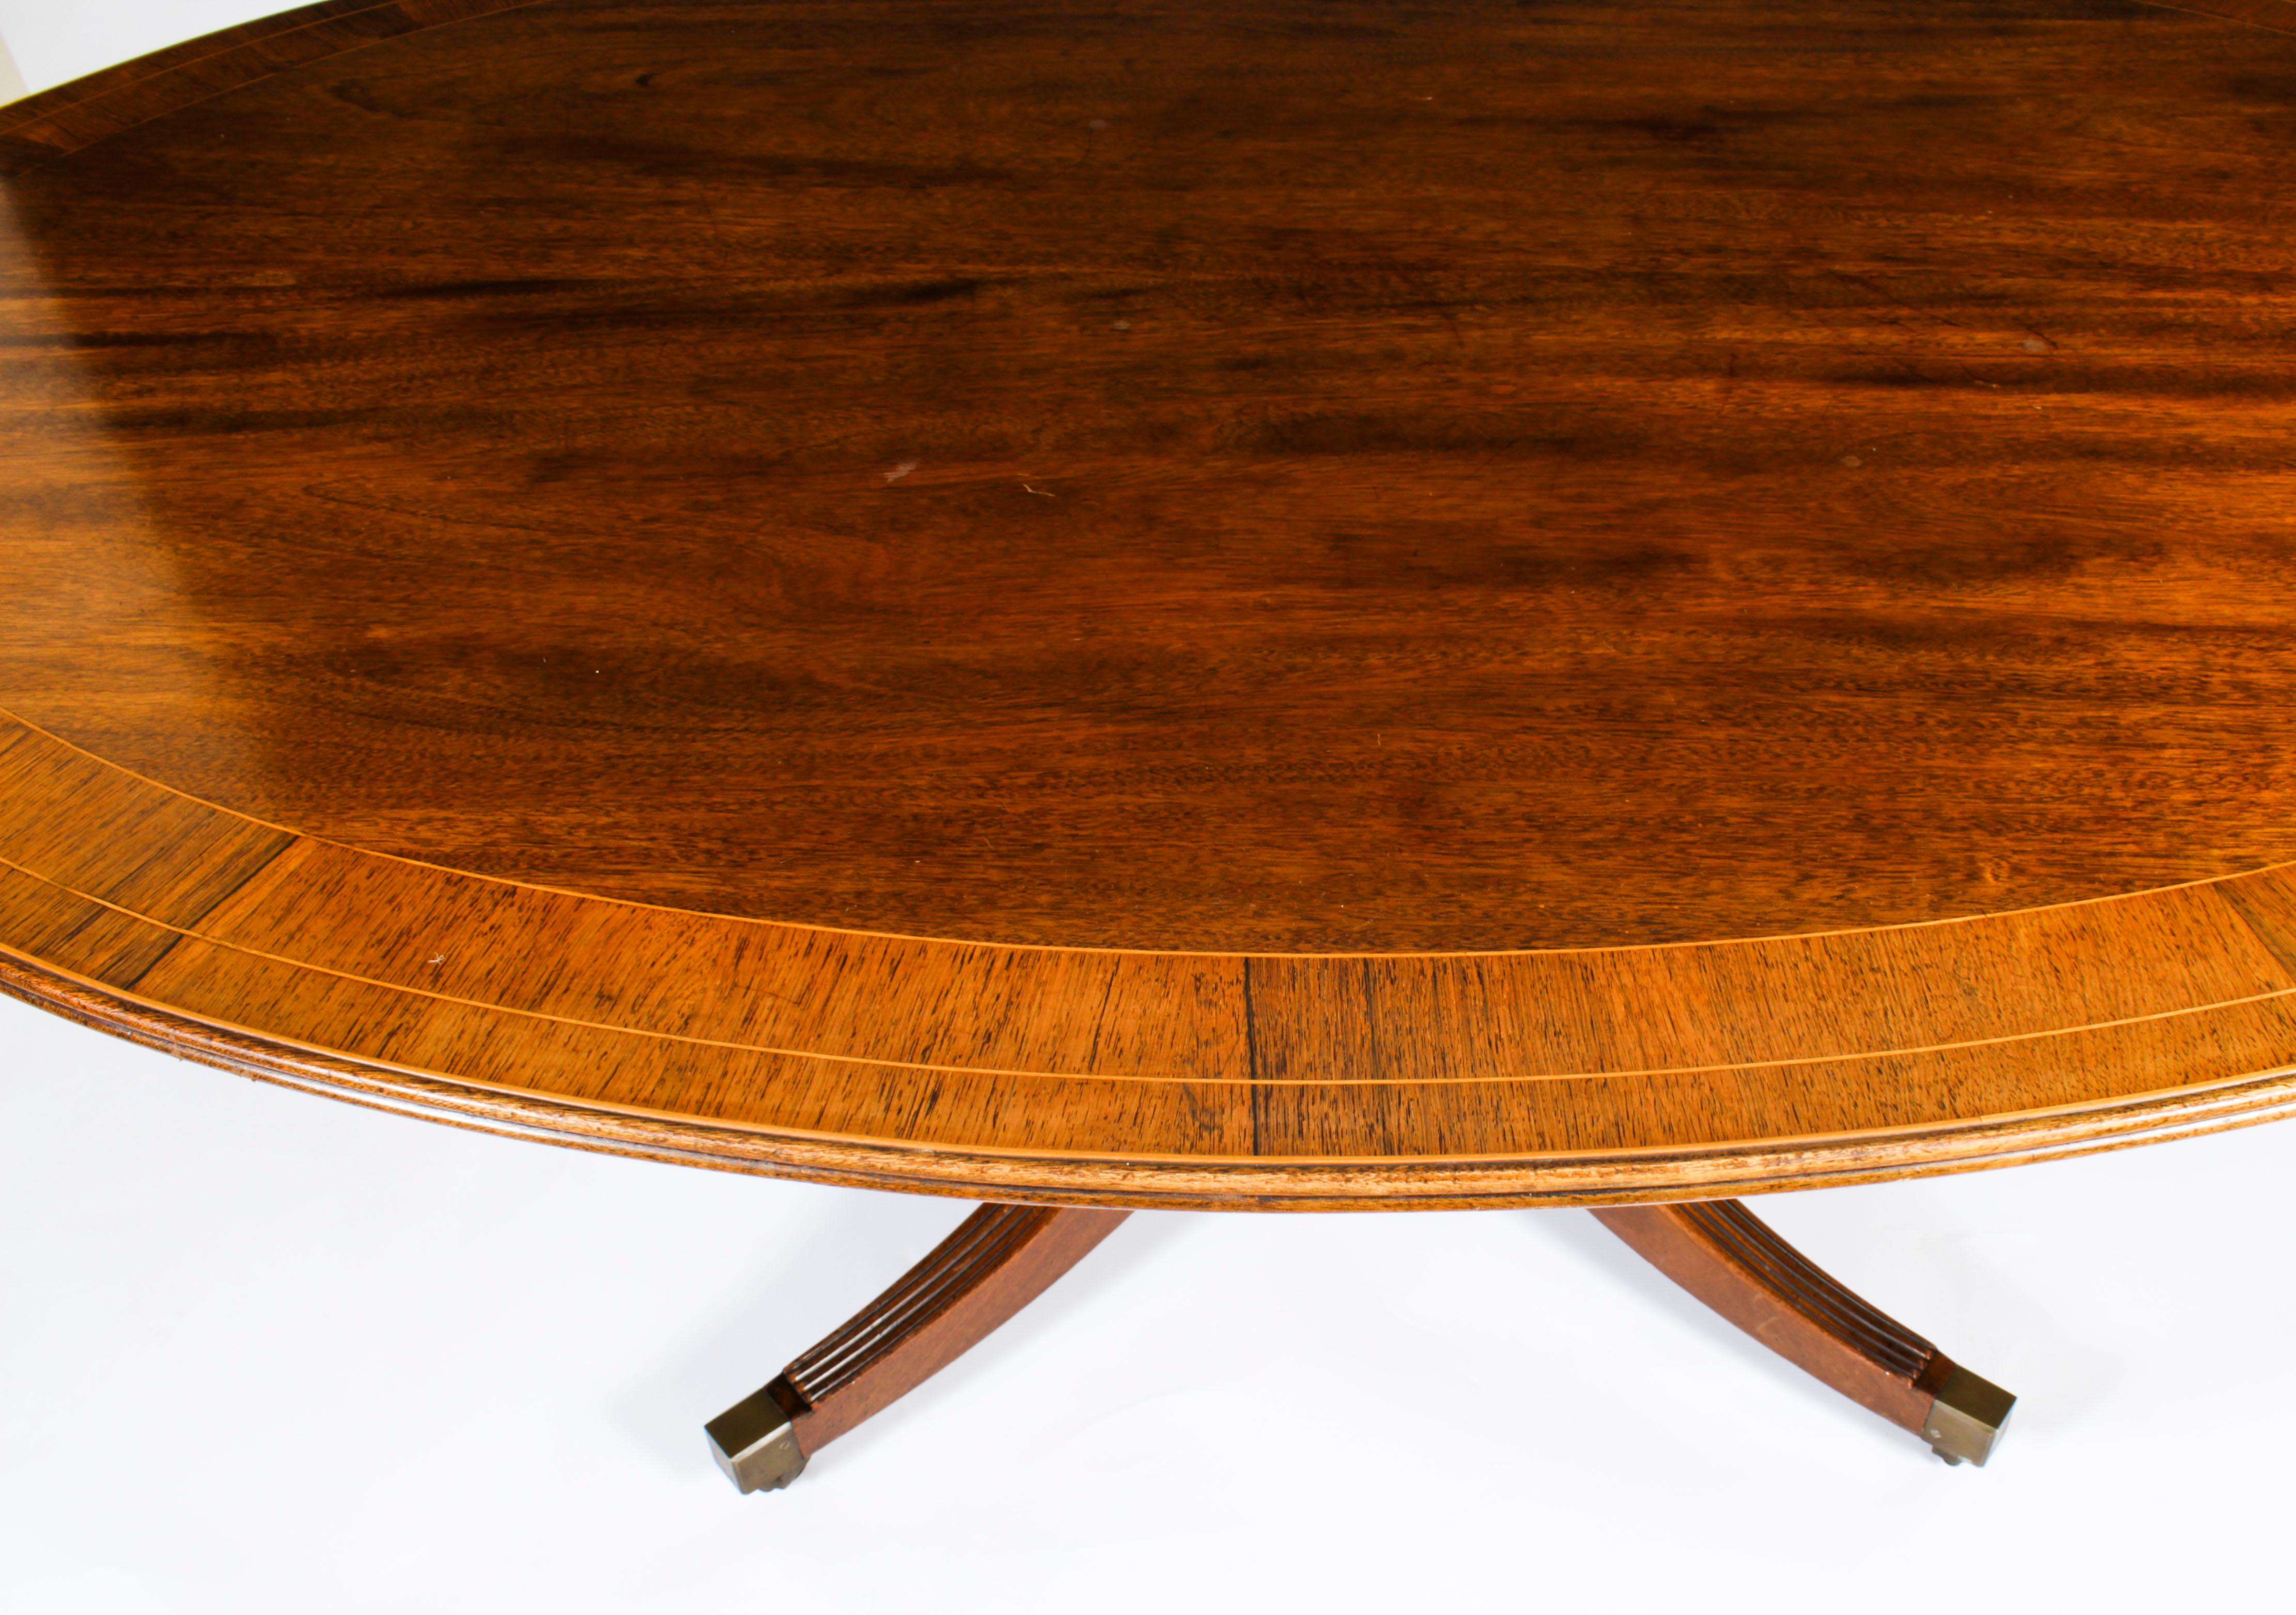 Antique Oval Mahogany Dining Table 1920s 1